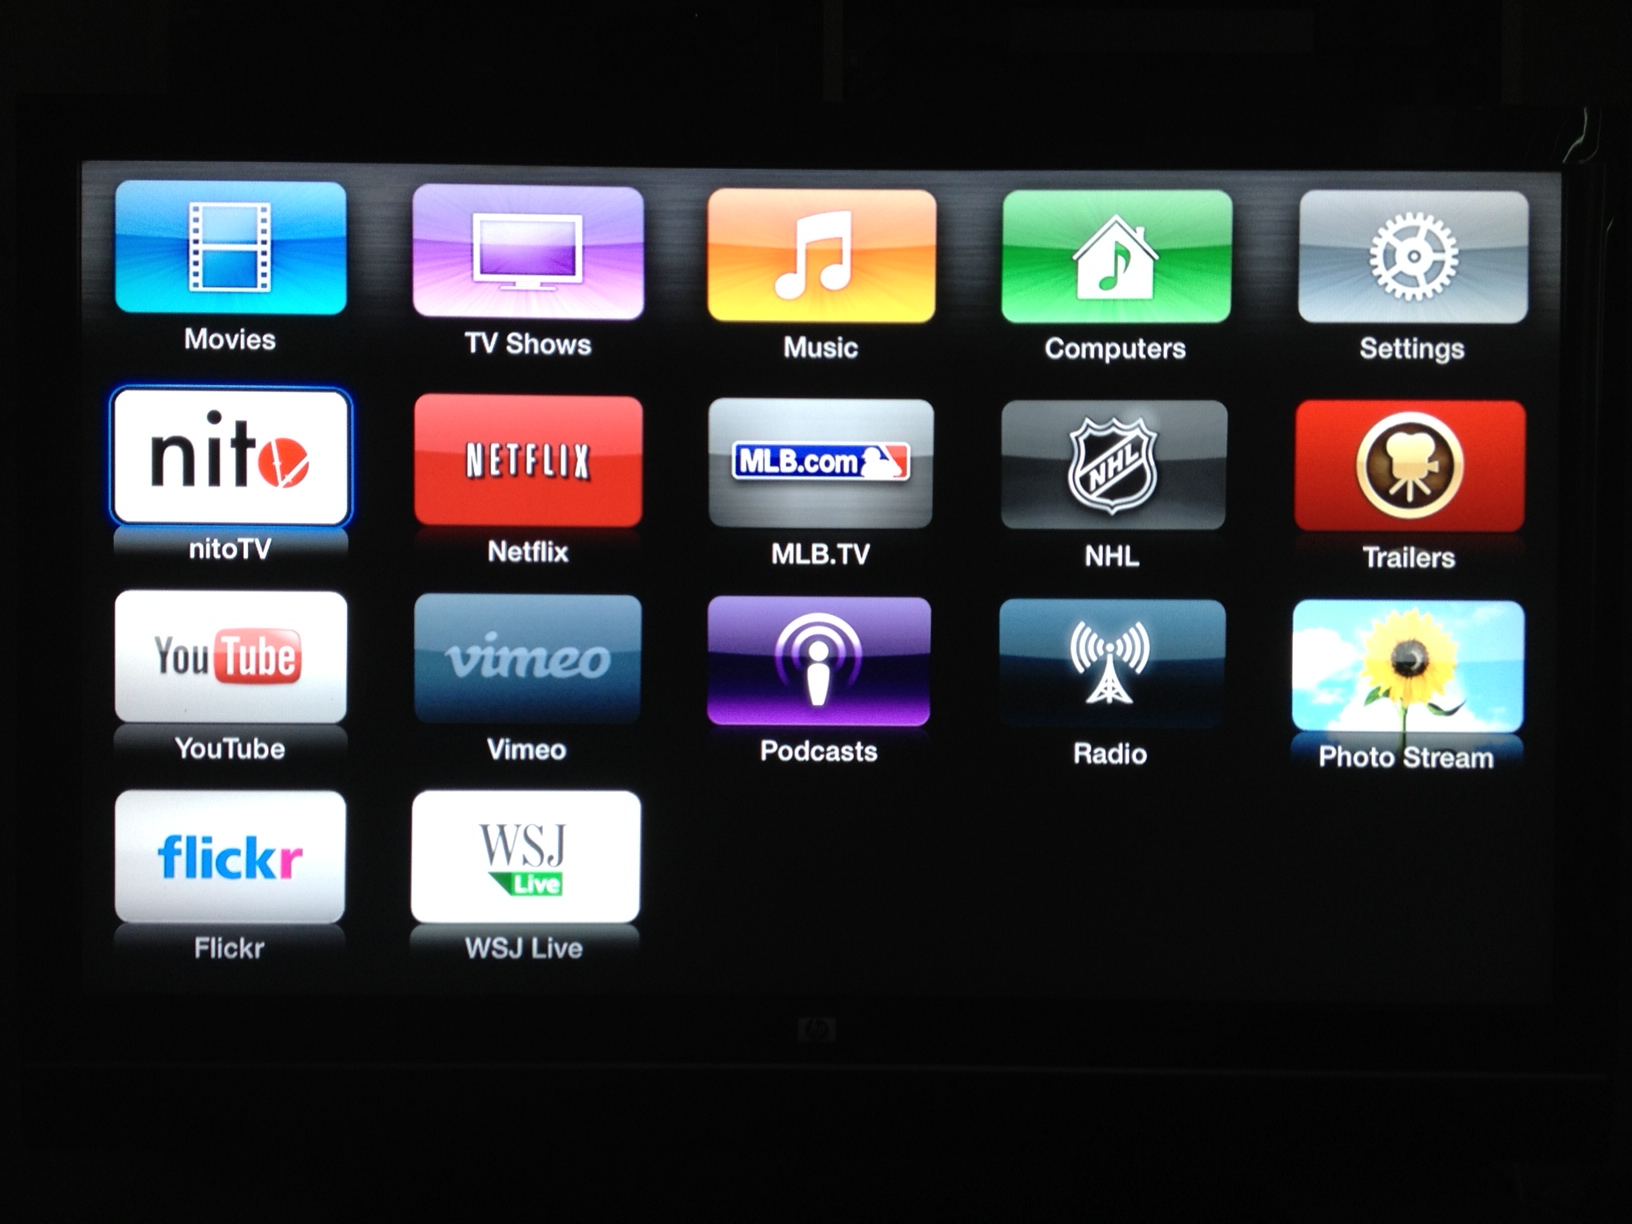 How to Easily Install nitoTV and XBMC on Your Apple TV 2